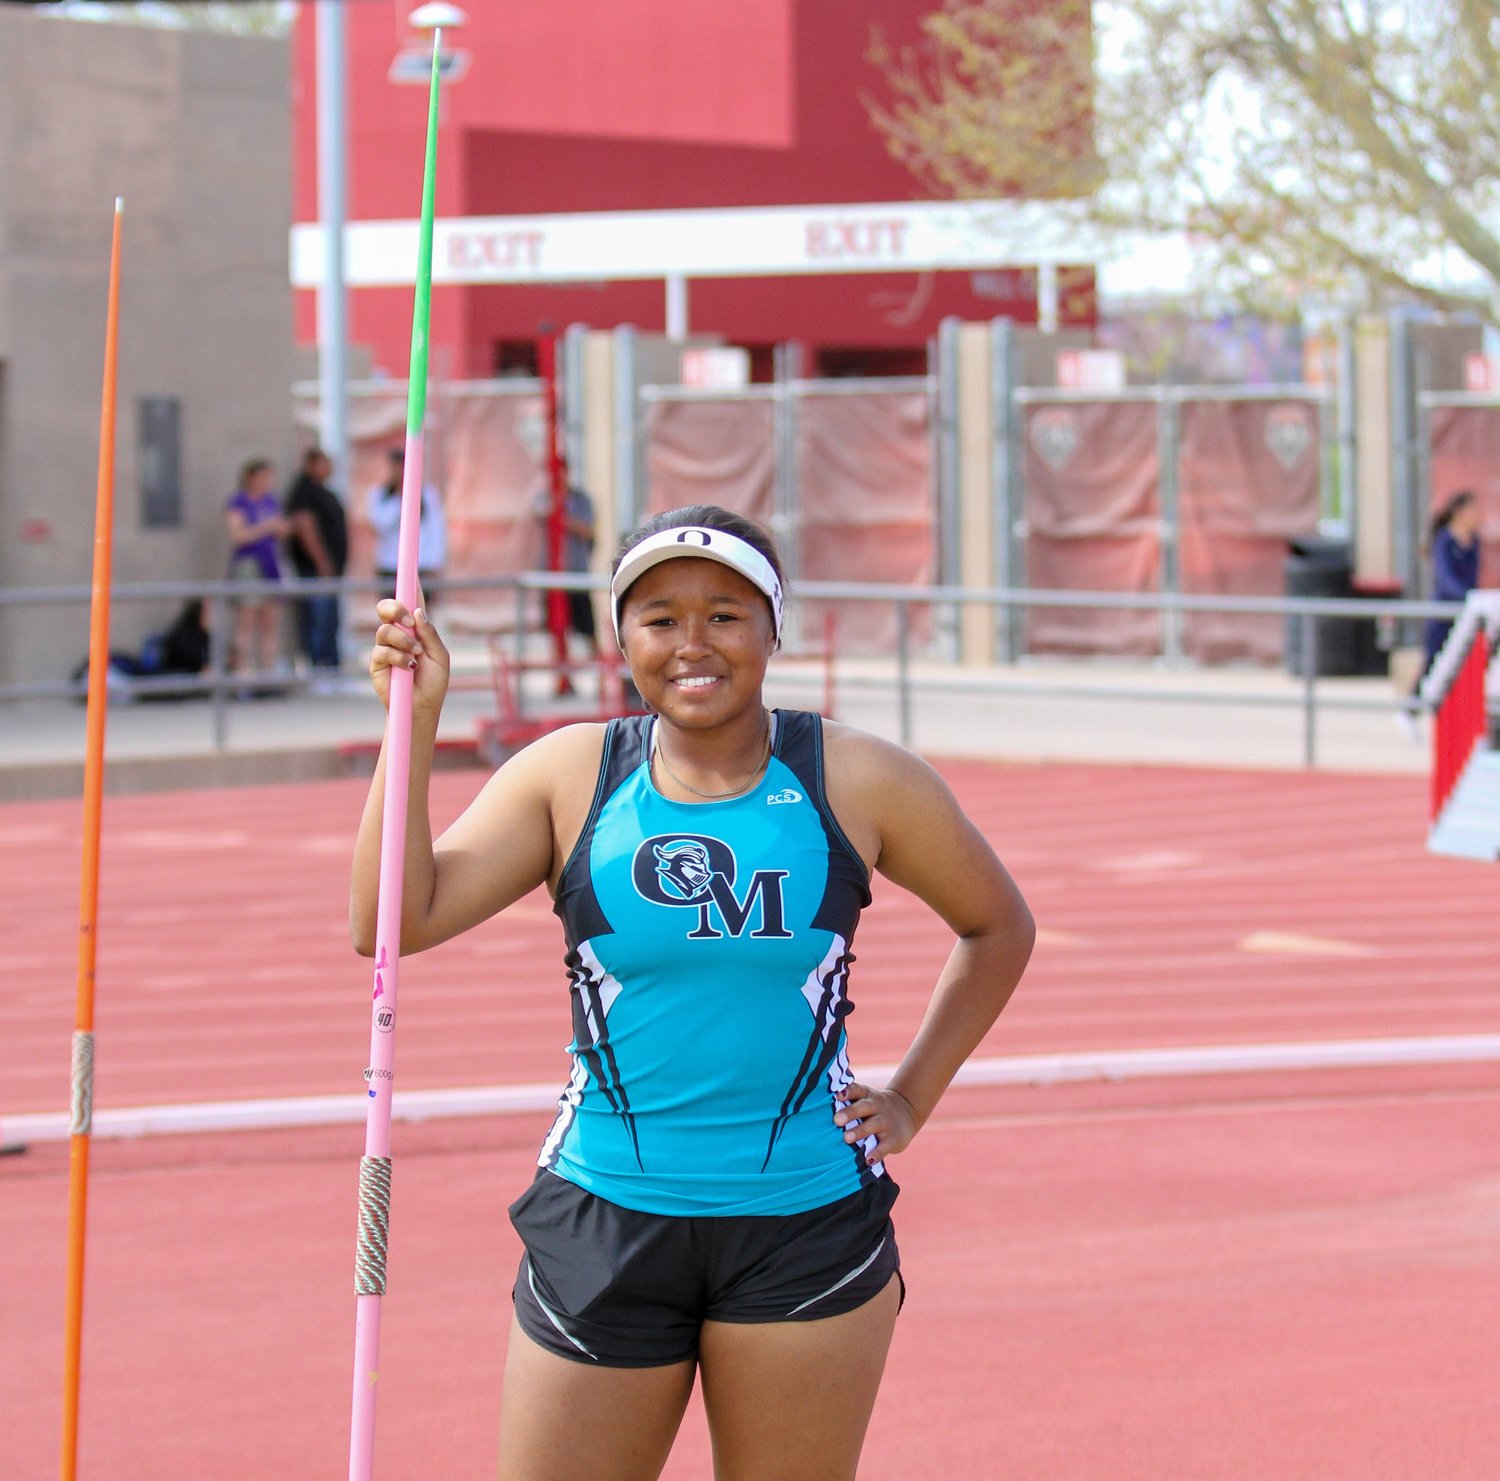 Organ Mountain High’s Shaolin Munir took first place in the girls javelin at the Meet of Champions Monday, April 11, in Albuquerque.